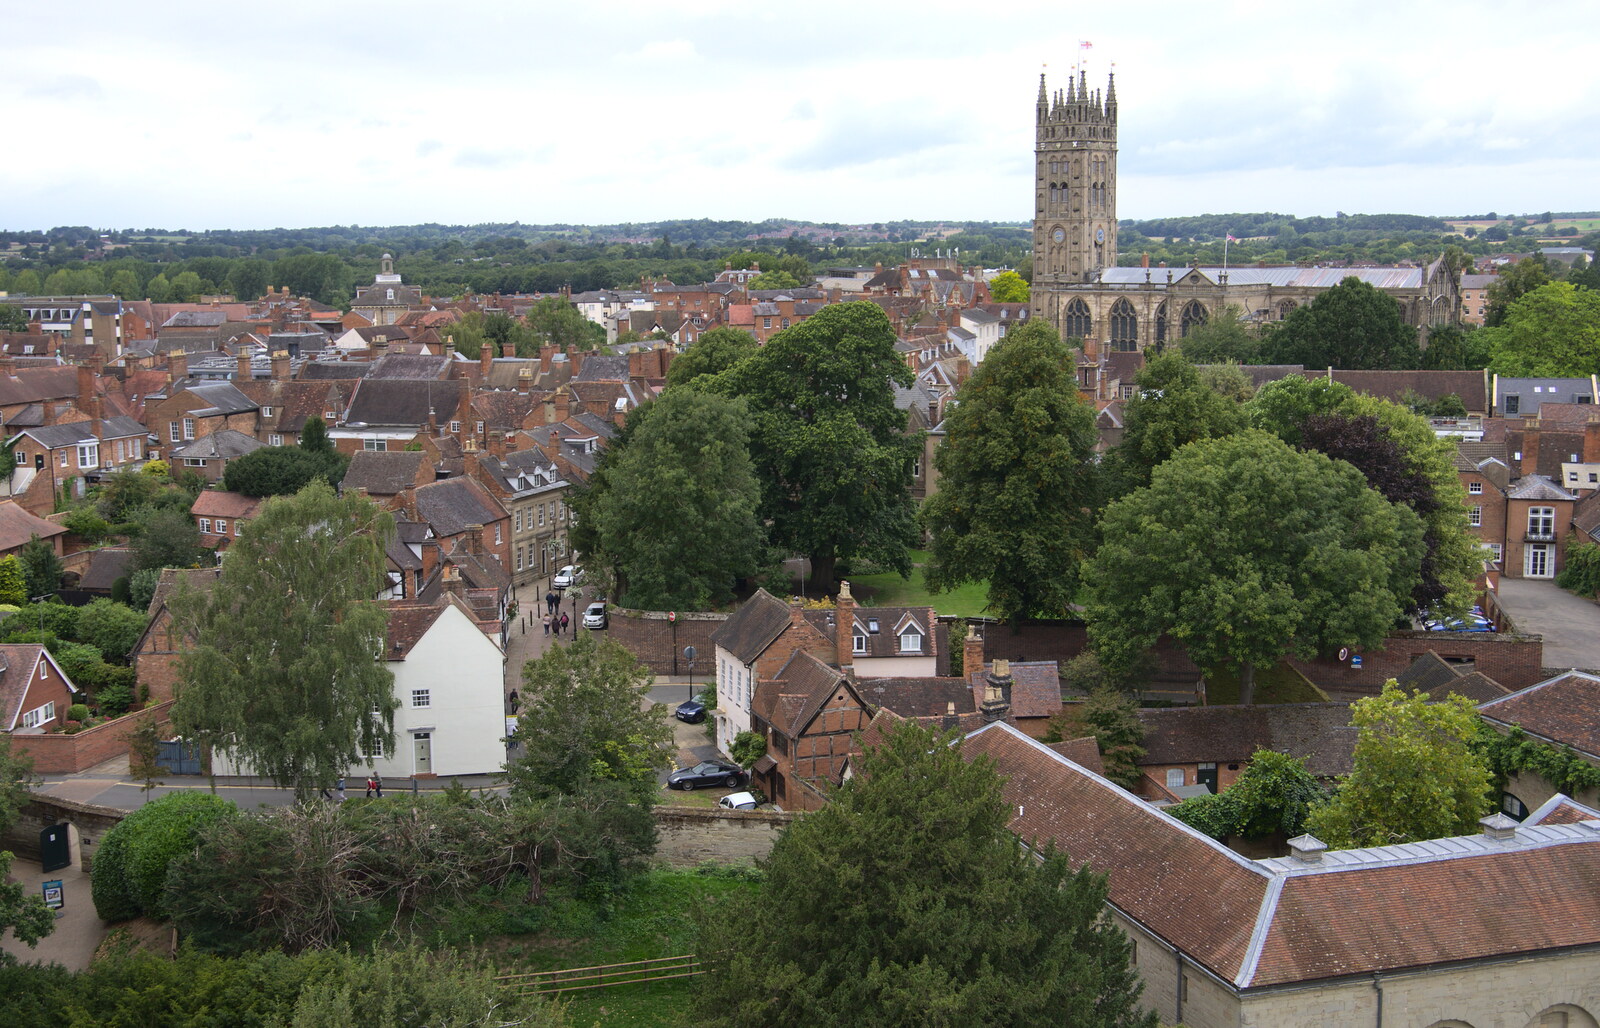 Warwick, as seen from the castle battlements from A Day at Warwick Castle, Warwickshire - 8th September 2018